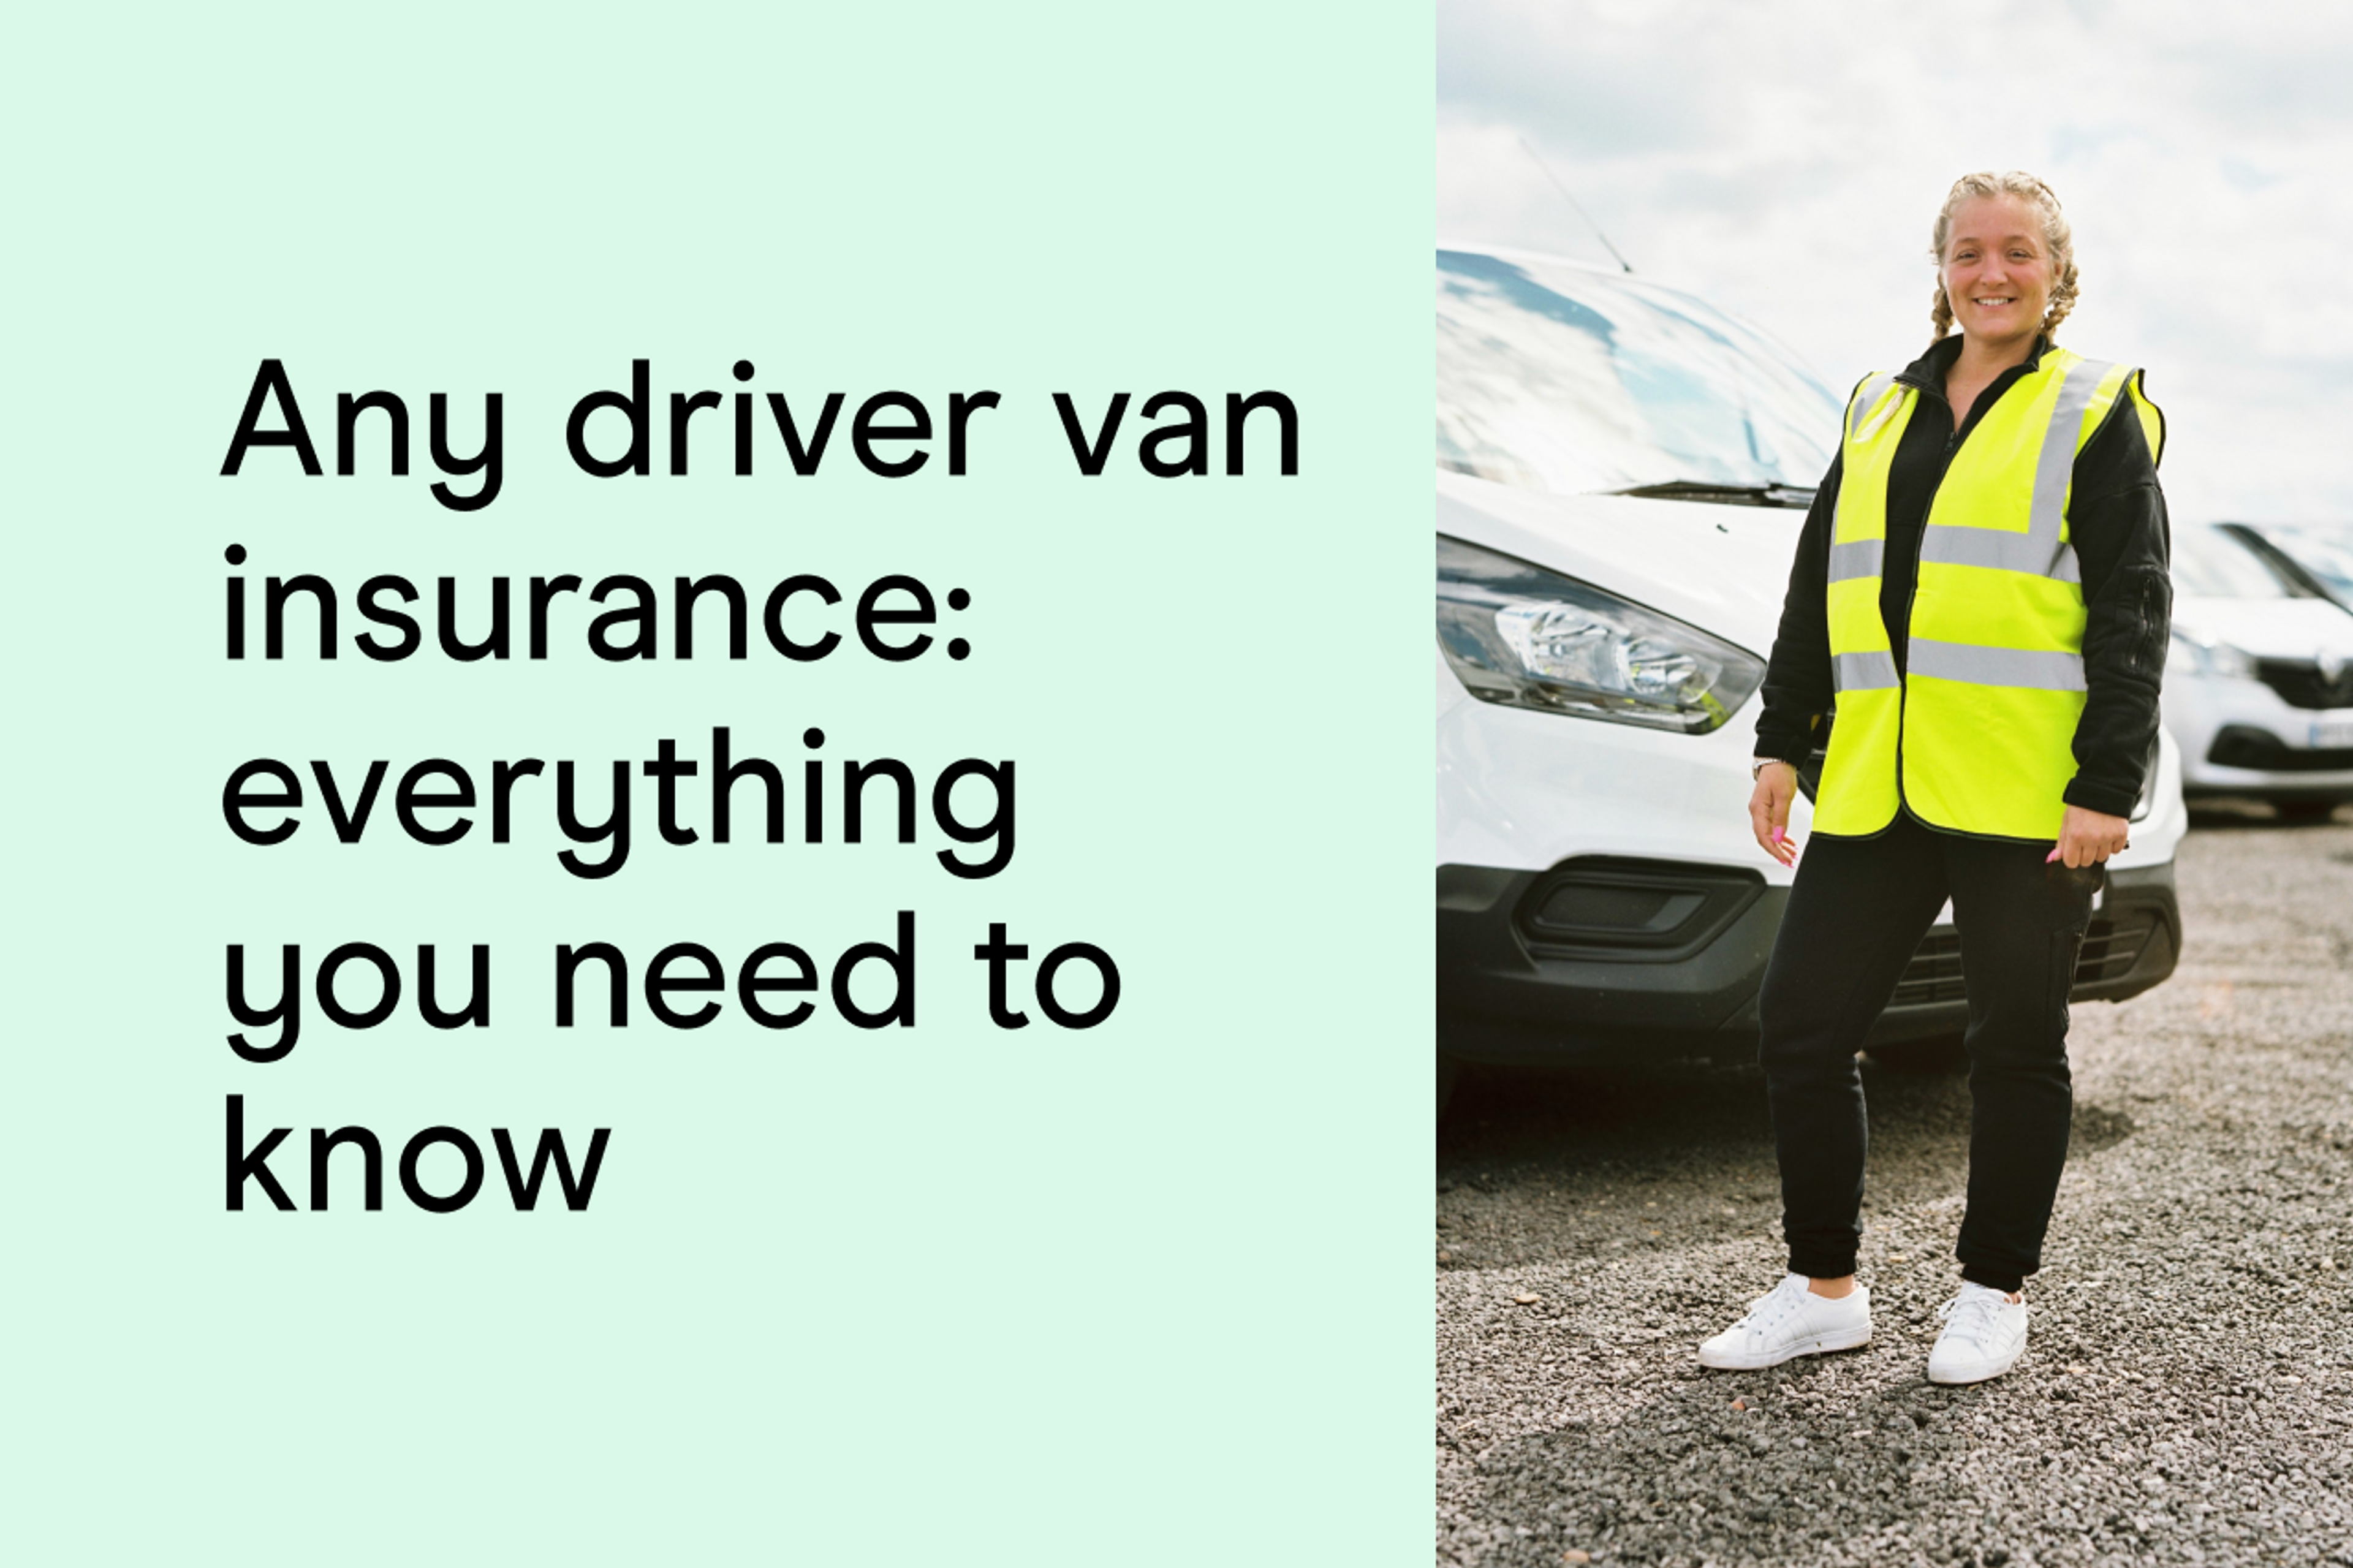 Any driver van insurance: Everything you need to know